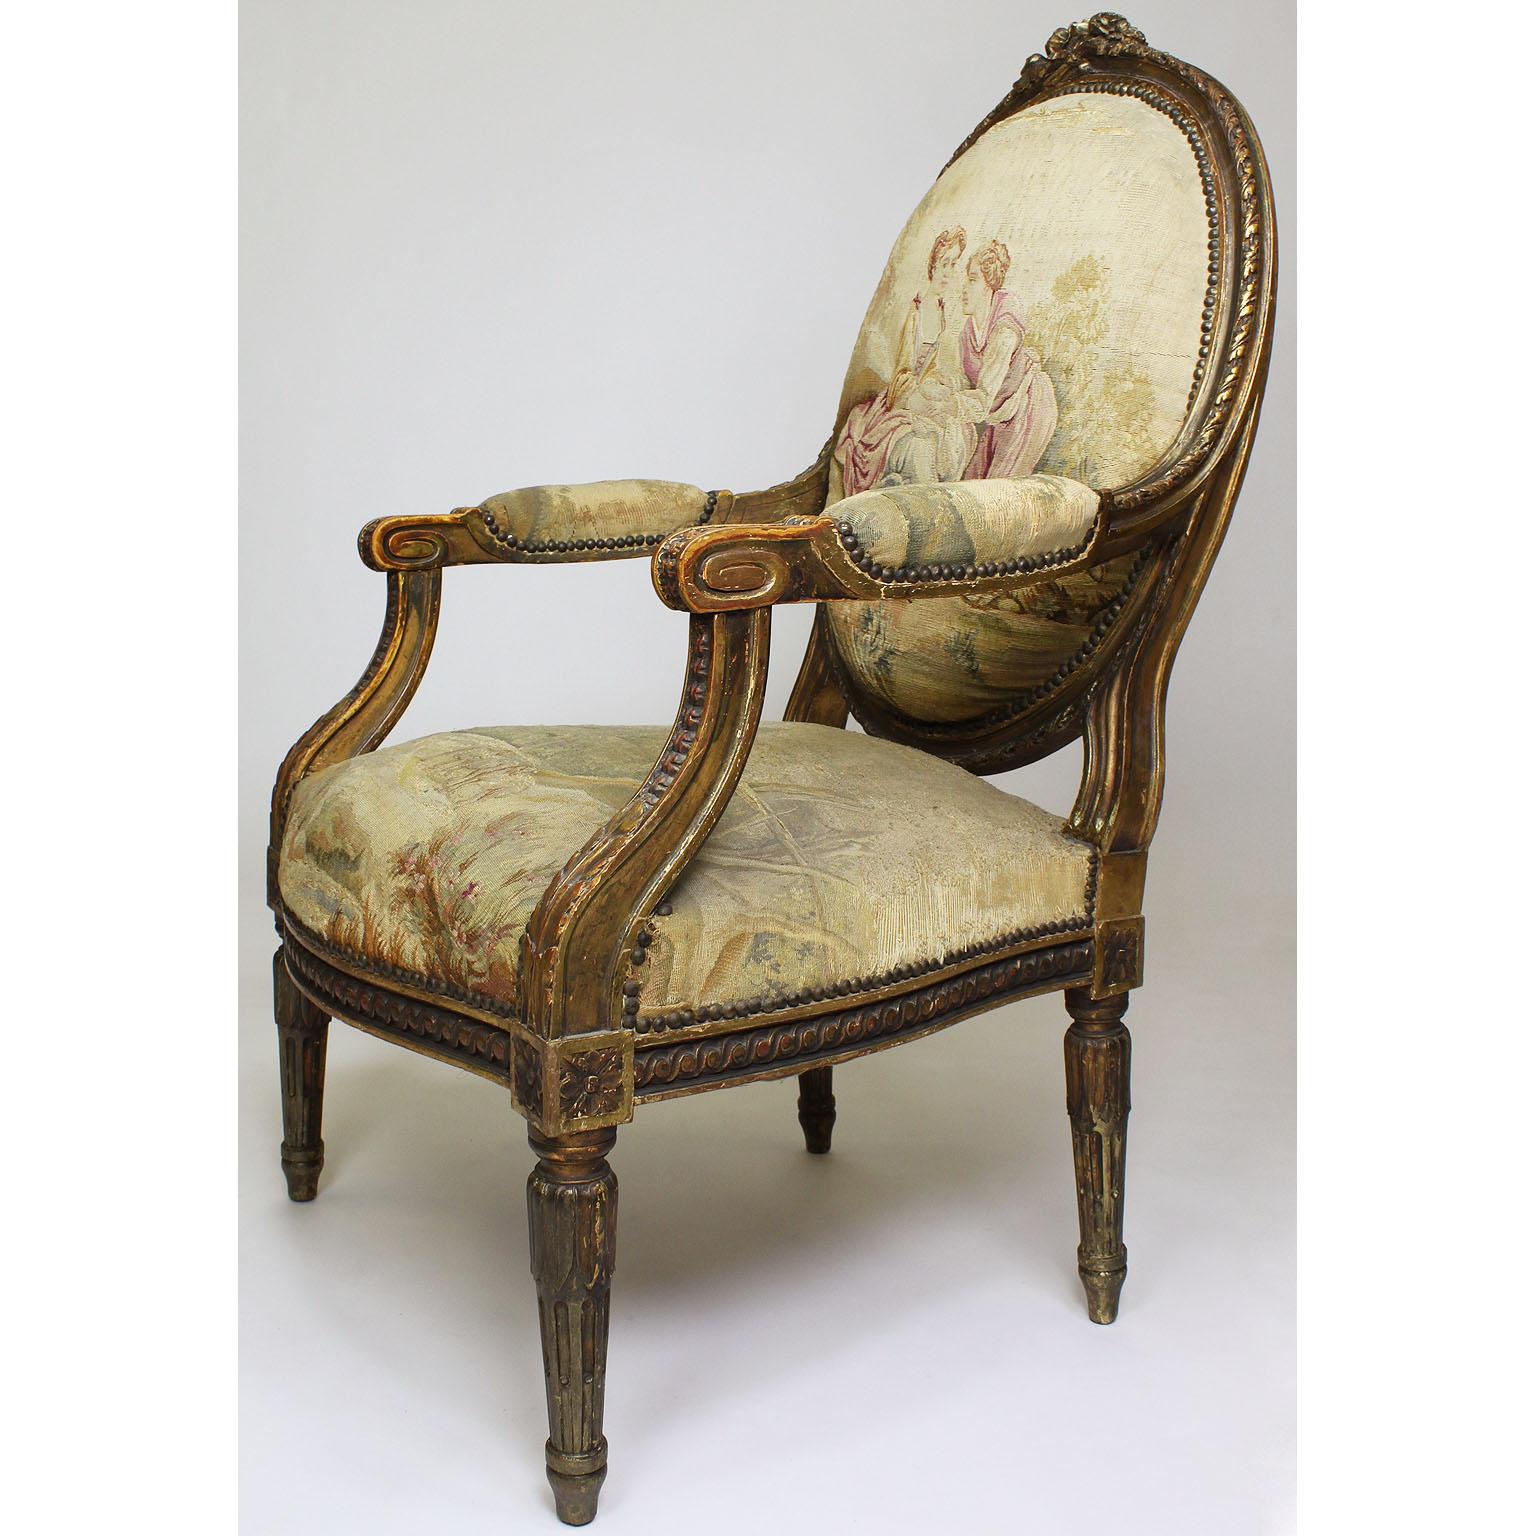 A set of four French 19th century Louis XVI style giltwood carved and Aubusson (worn) tapestry upholstered fauteuils a la reine armchairs. The banded oval back surmounted by a carved floral garland over leaf tip and scrolling acanthus carved padded